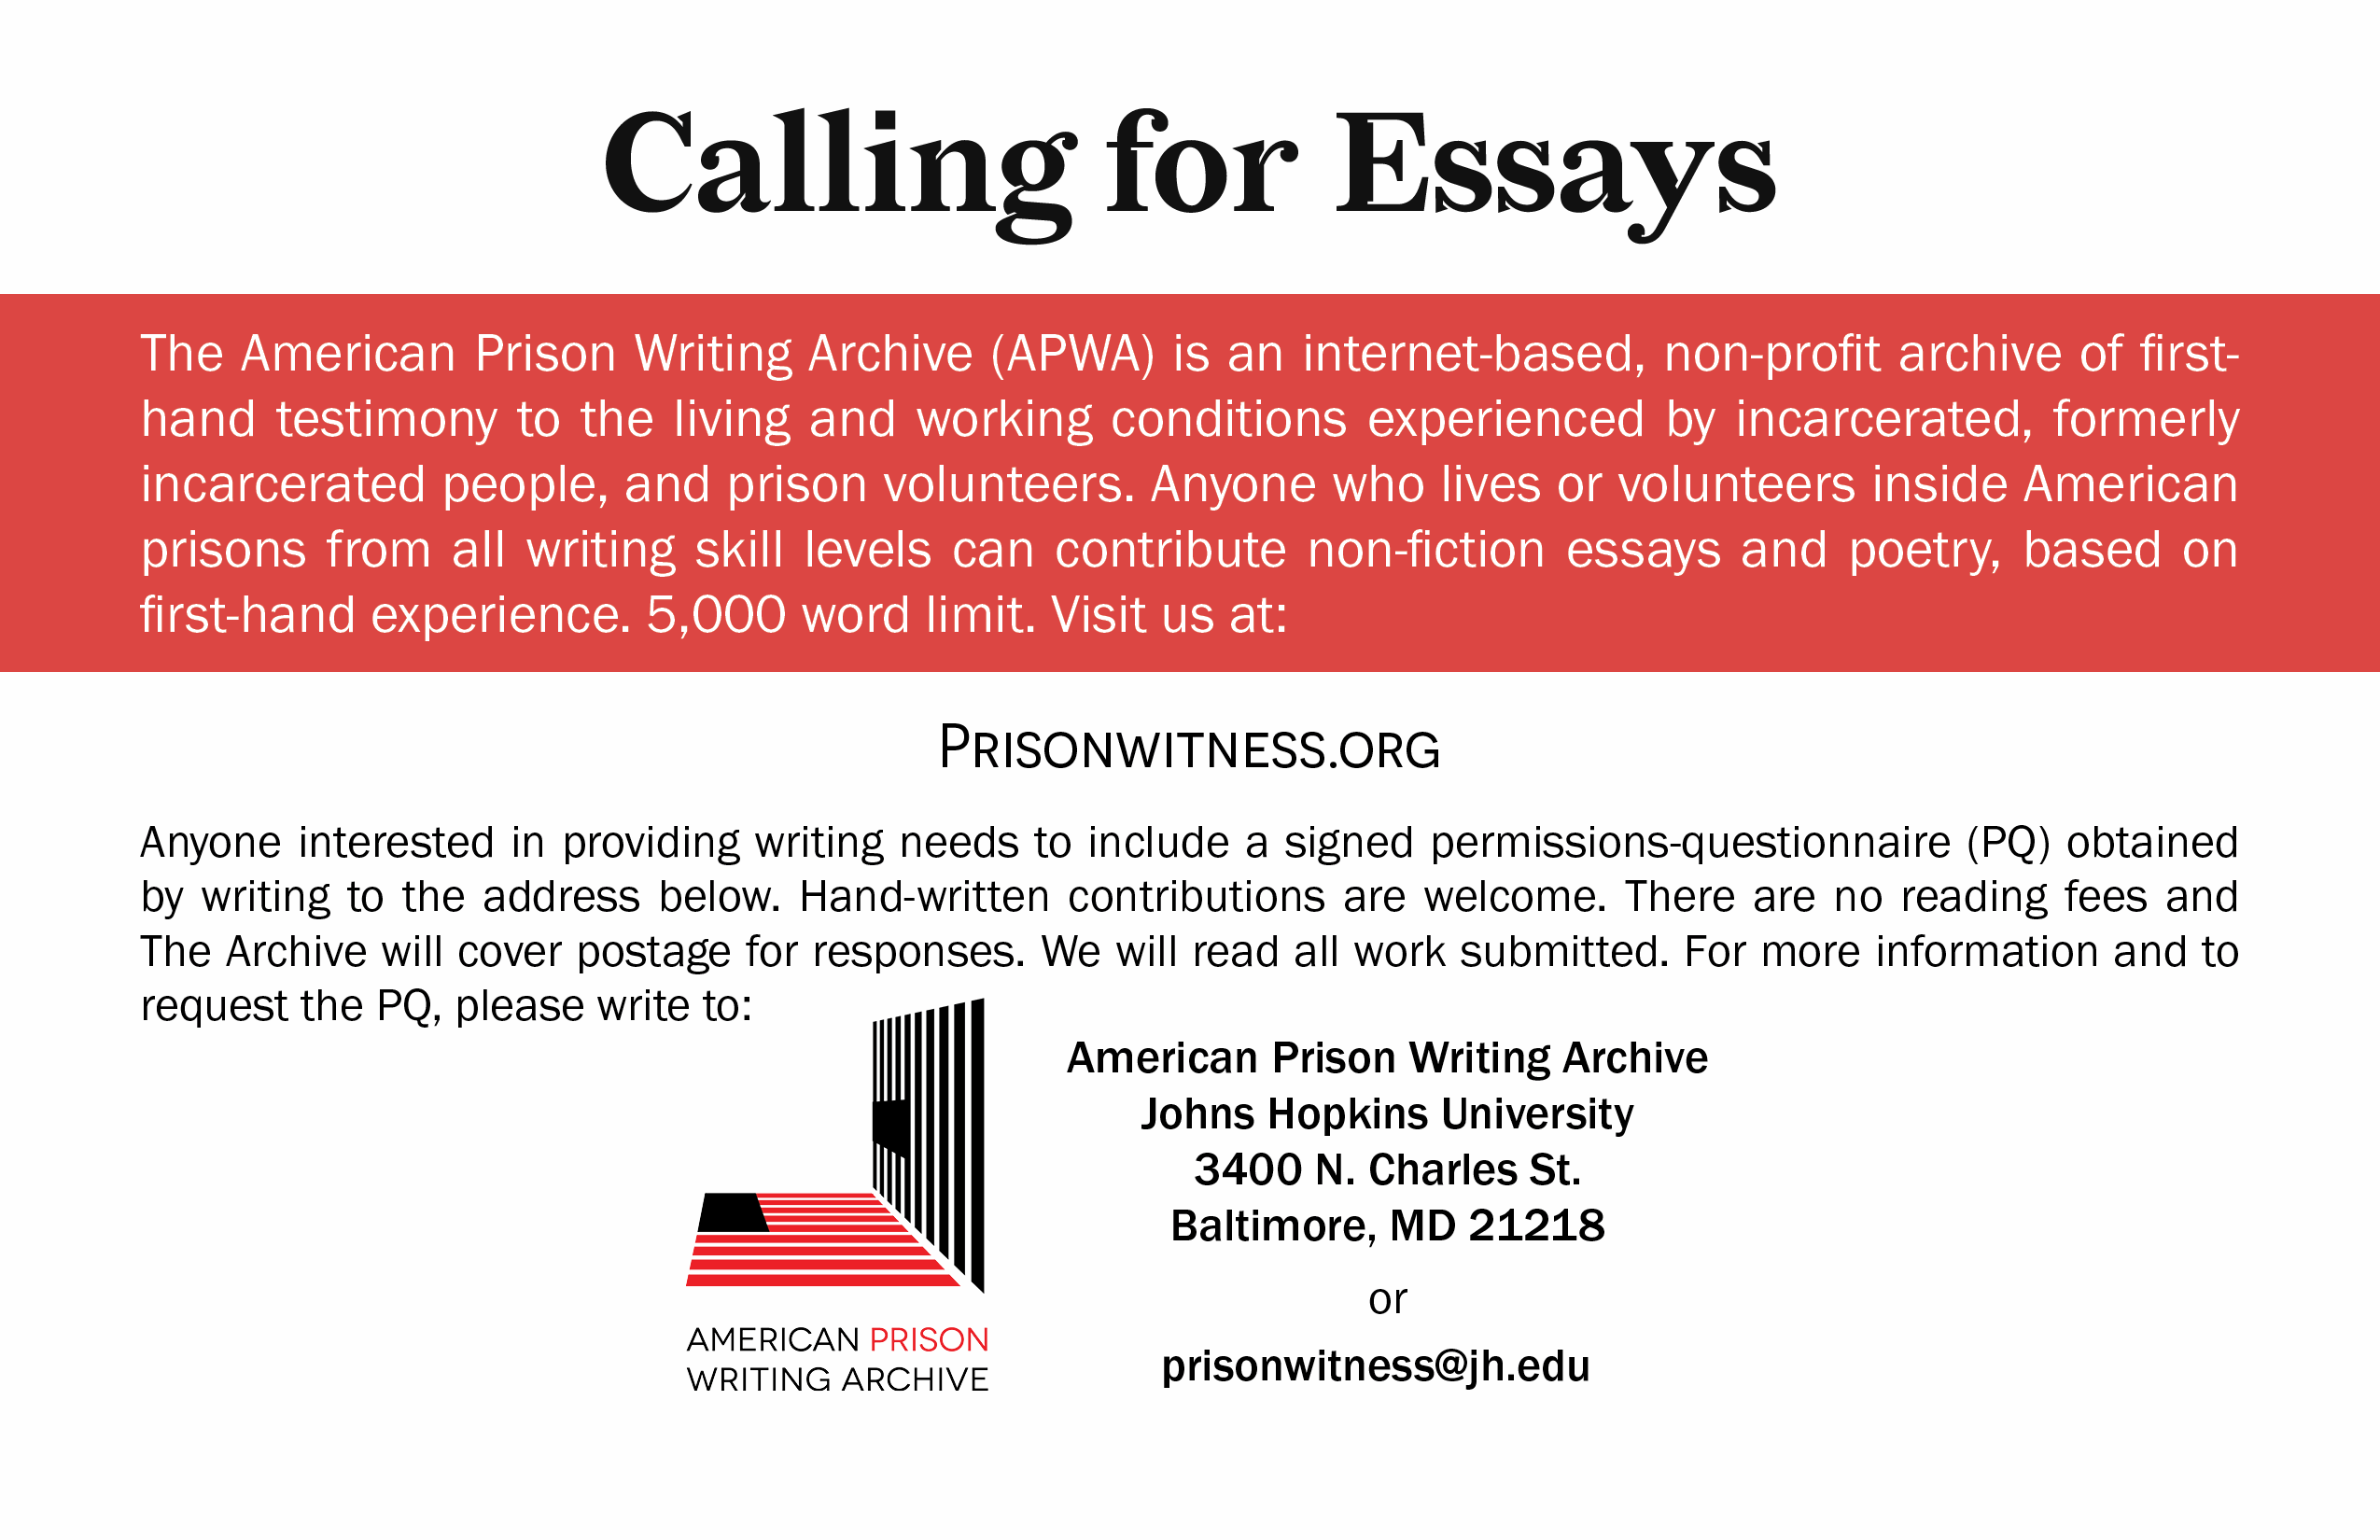 Call for Essays